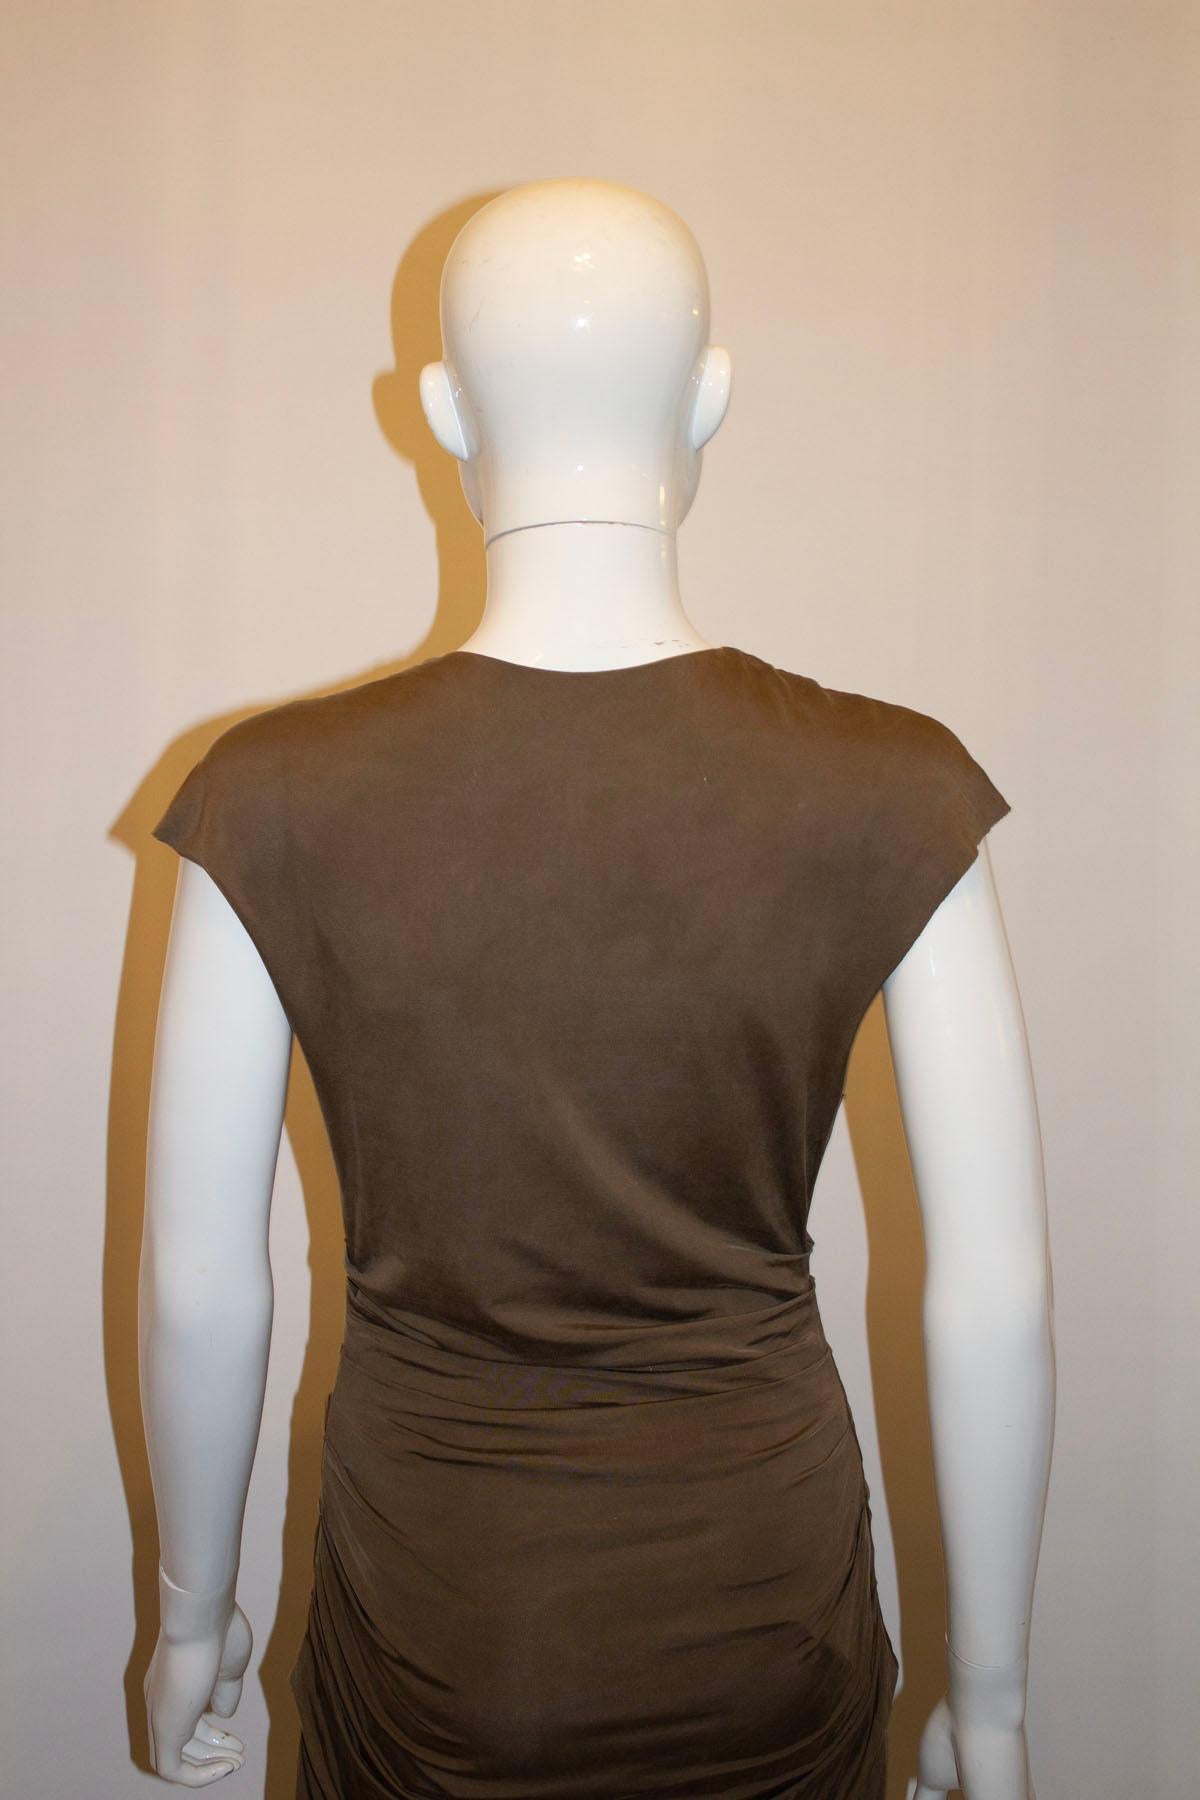 Helmut Lang Sheath Dress In Good Condition For Sale In London, GB